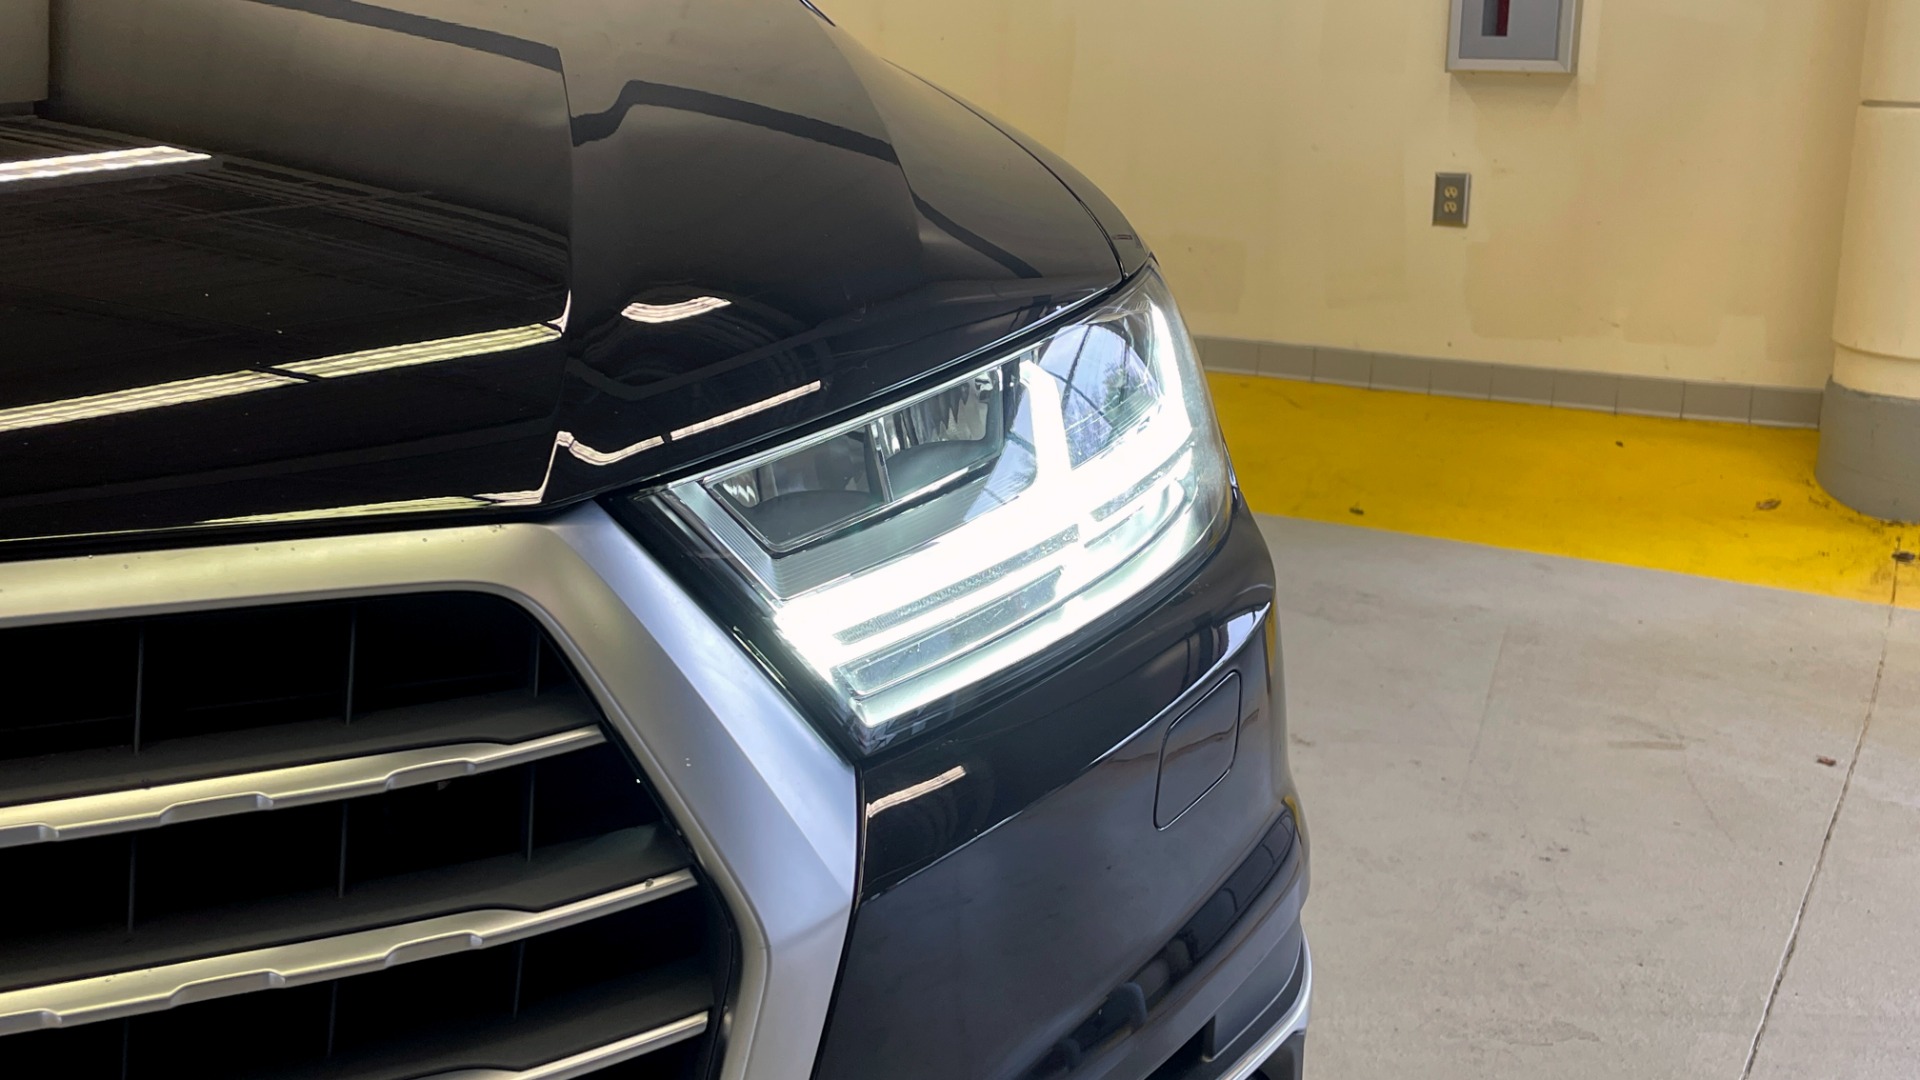 Used 2019 Audi Q7 PREMIUM PLUS / NAV / SUNROOF / DRVR ASST / COLD WTHR / 20IN WHLS / REARVIEW for sale Sold at Formula Imports in Charlotte NC 28227 11